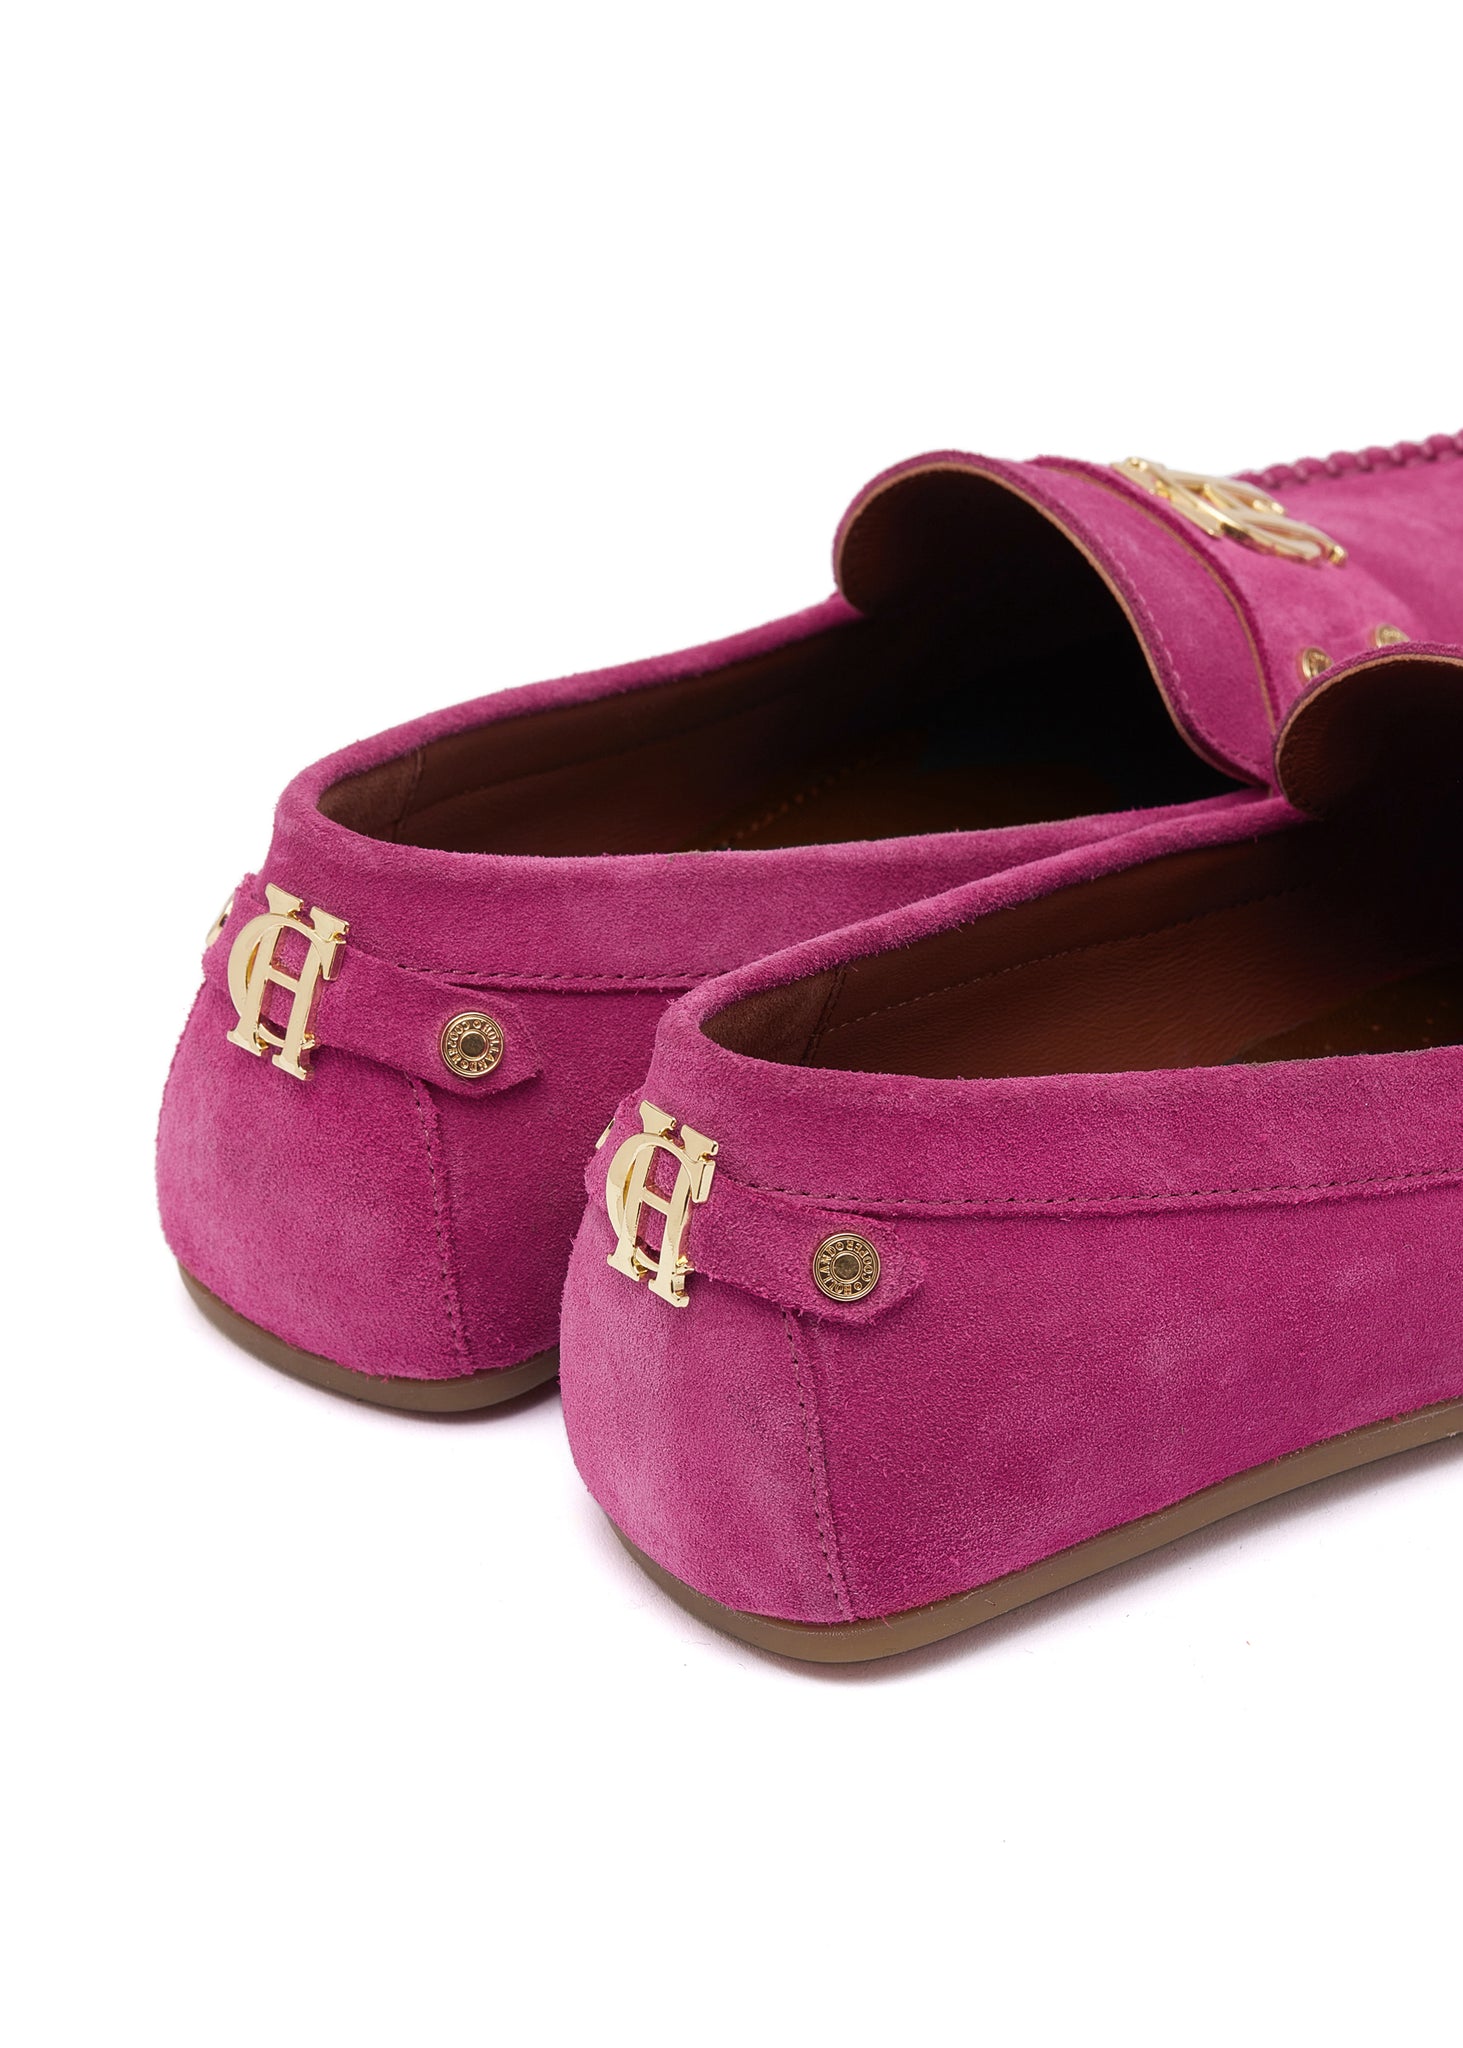 back of bright pink suede loafers with a leather sole and top stitching details and gold hardware